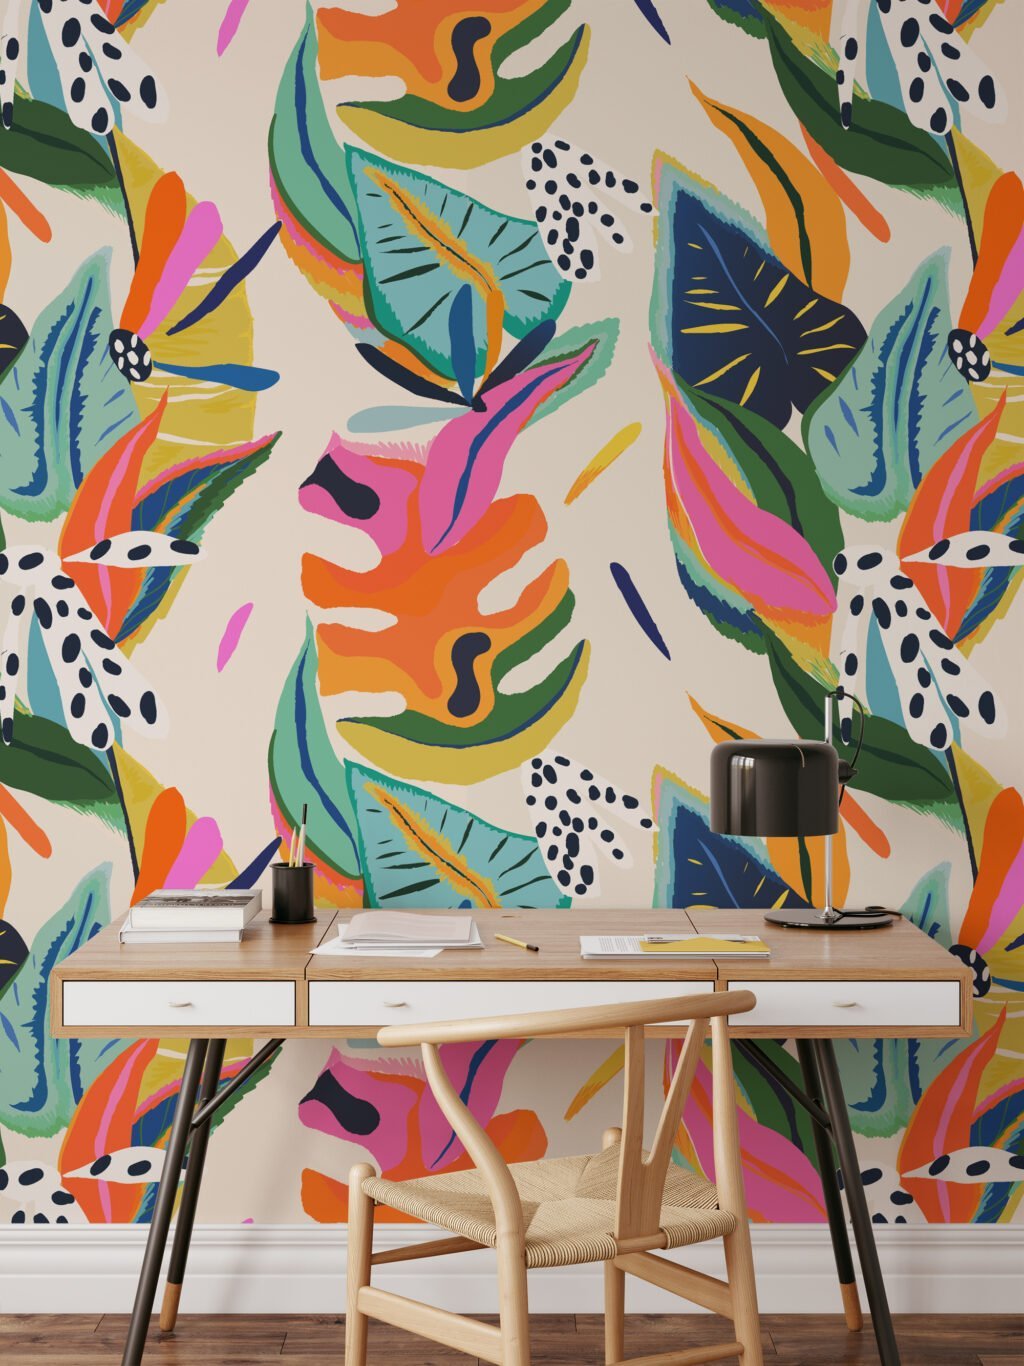 Abstract Colorful Leaves Wallpaper, Vibrant Tropical Contemporary Peel & Stick Wall Mural